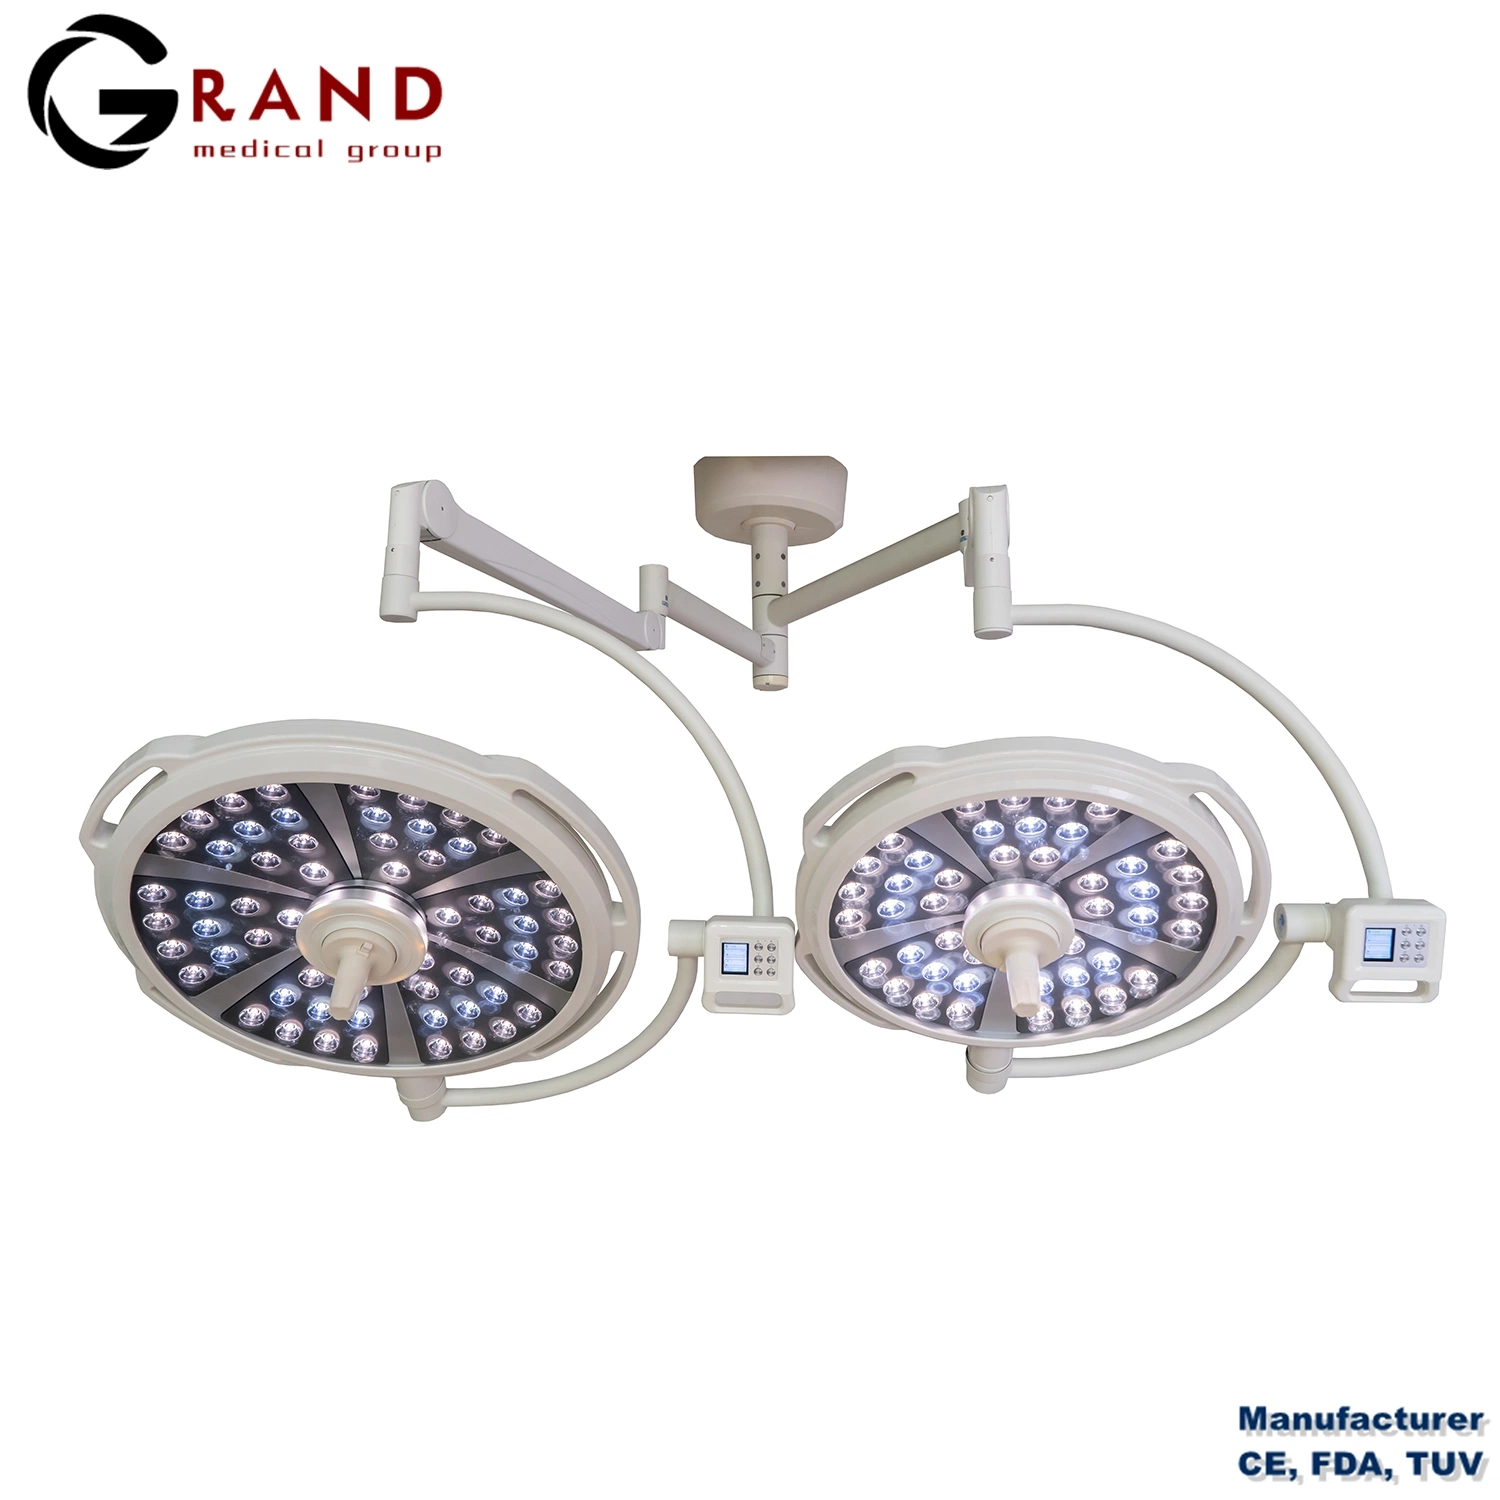 Floor/Ceiling Mounted LED Operating Lamp Shadowless Surgical Light for Operation Room Hospital Surgery Threatre Lighting Device Equipment